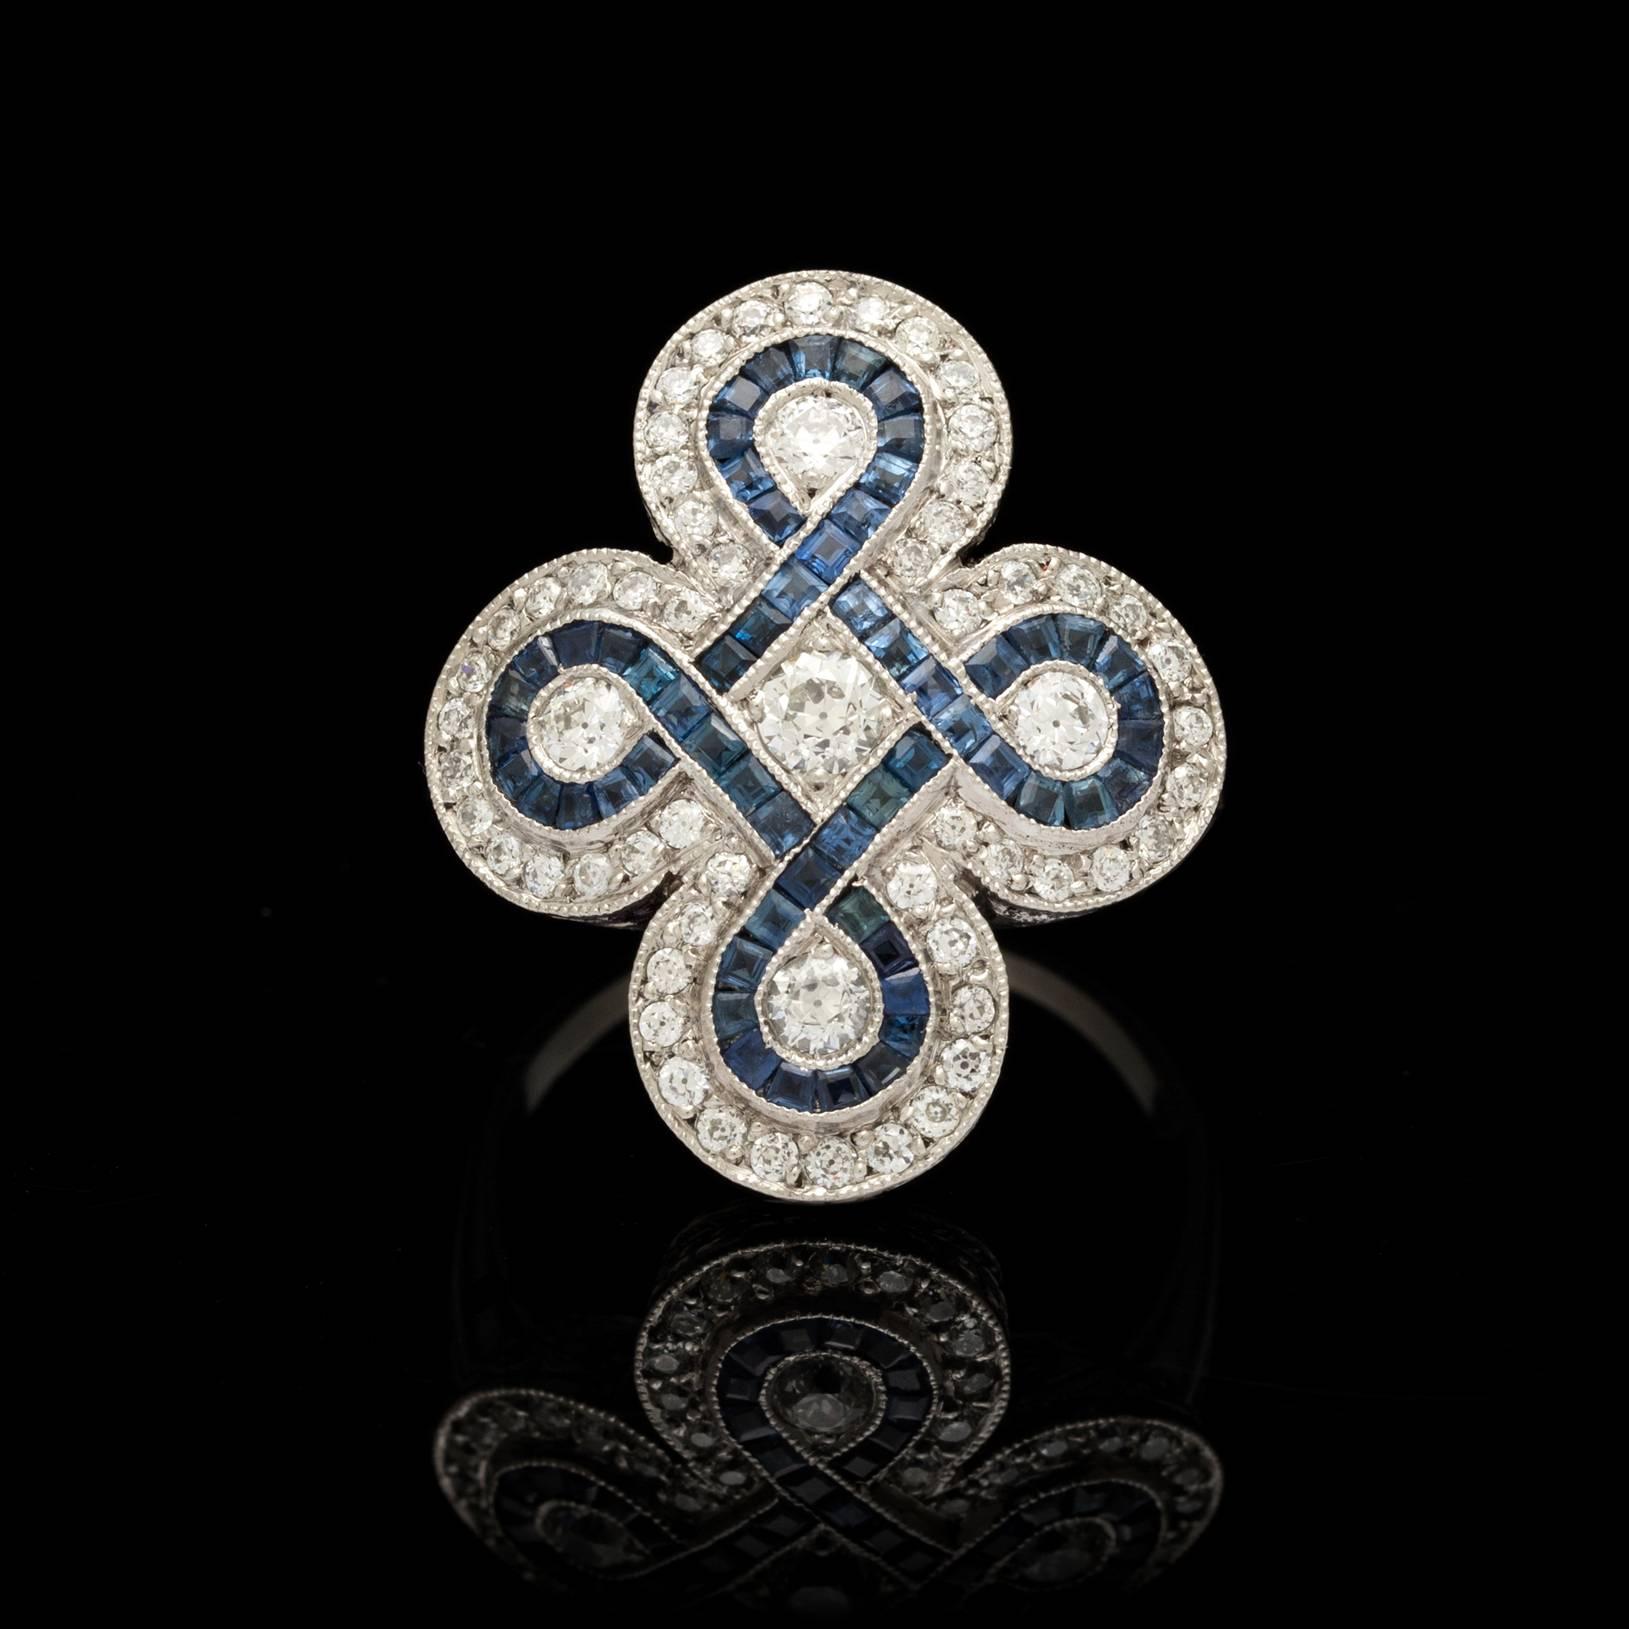 Deco style platinum ring features 5 old european cut diamonds totaling 0.40 carats. Surrounding these 5 diamonds in a swirl pattern are square cut sapphires detailed with 0.56 carats of old european diamonds along the border. Ring size is a 6.25 and